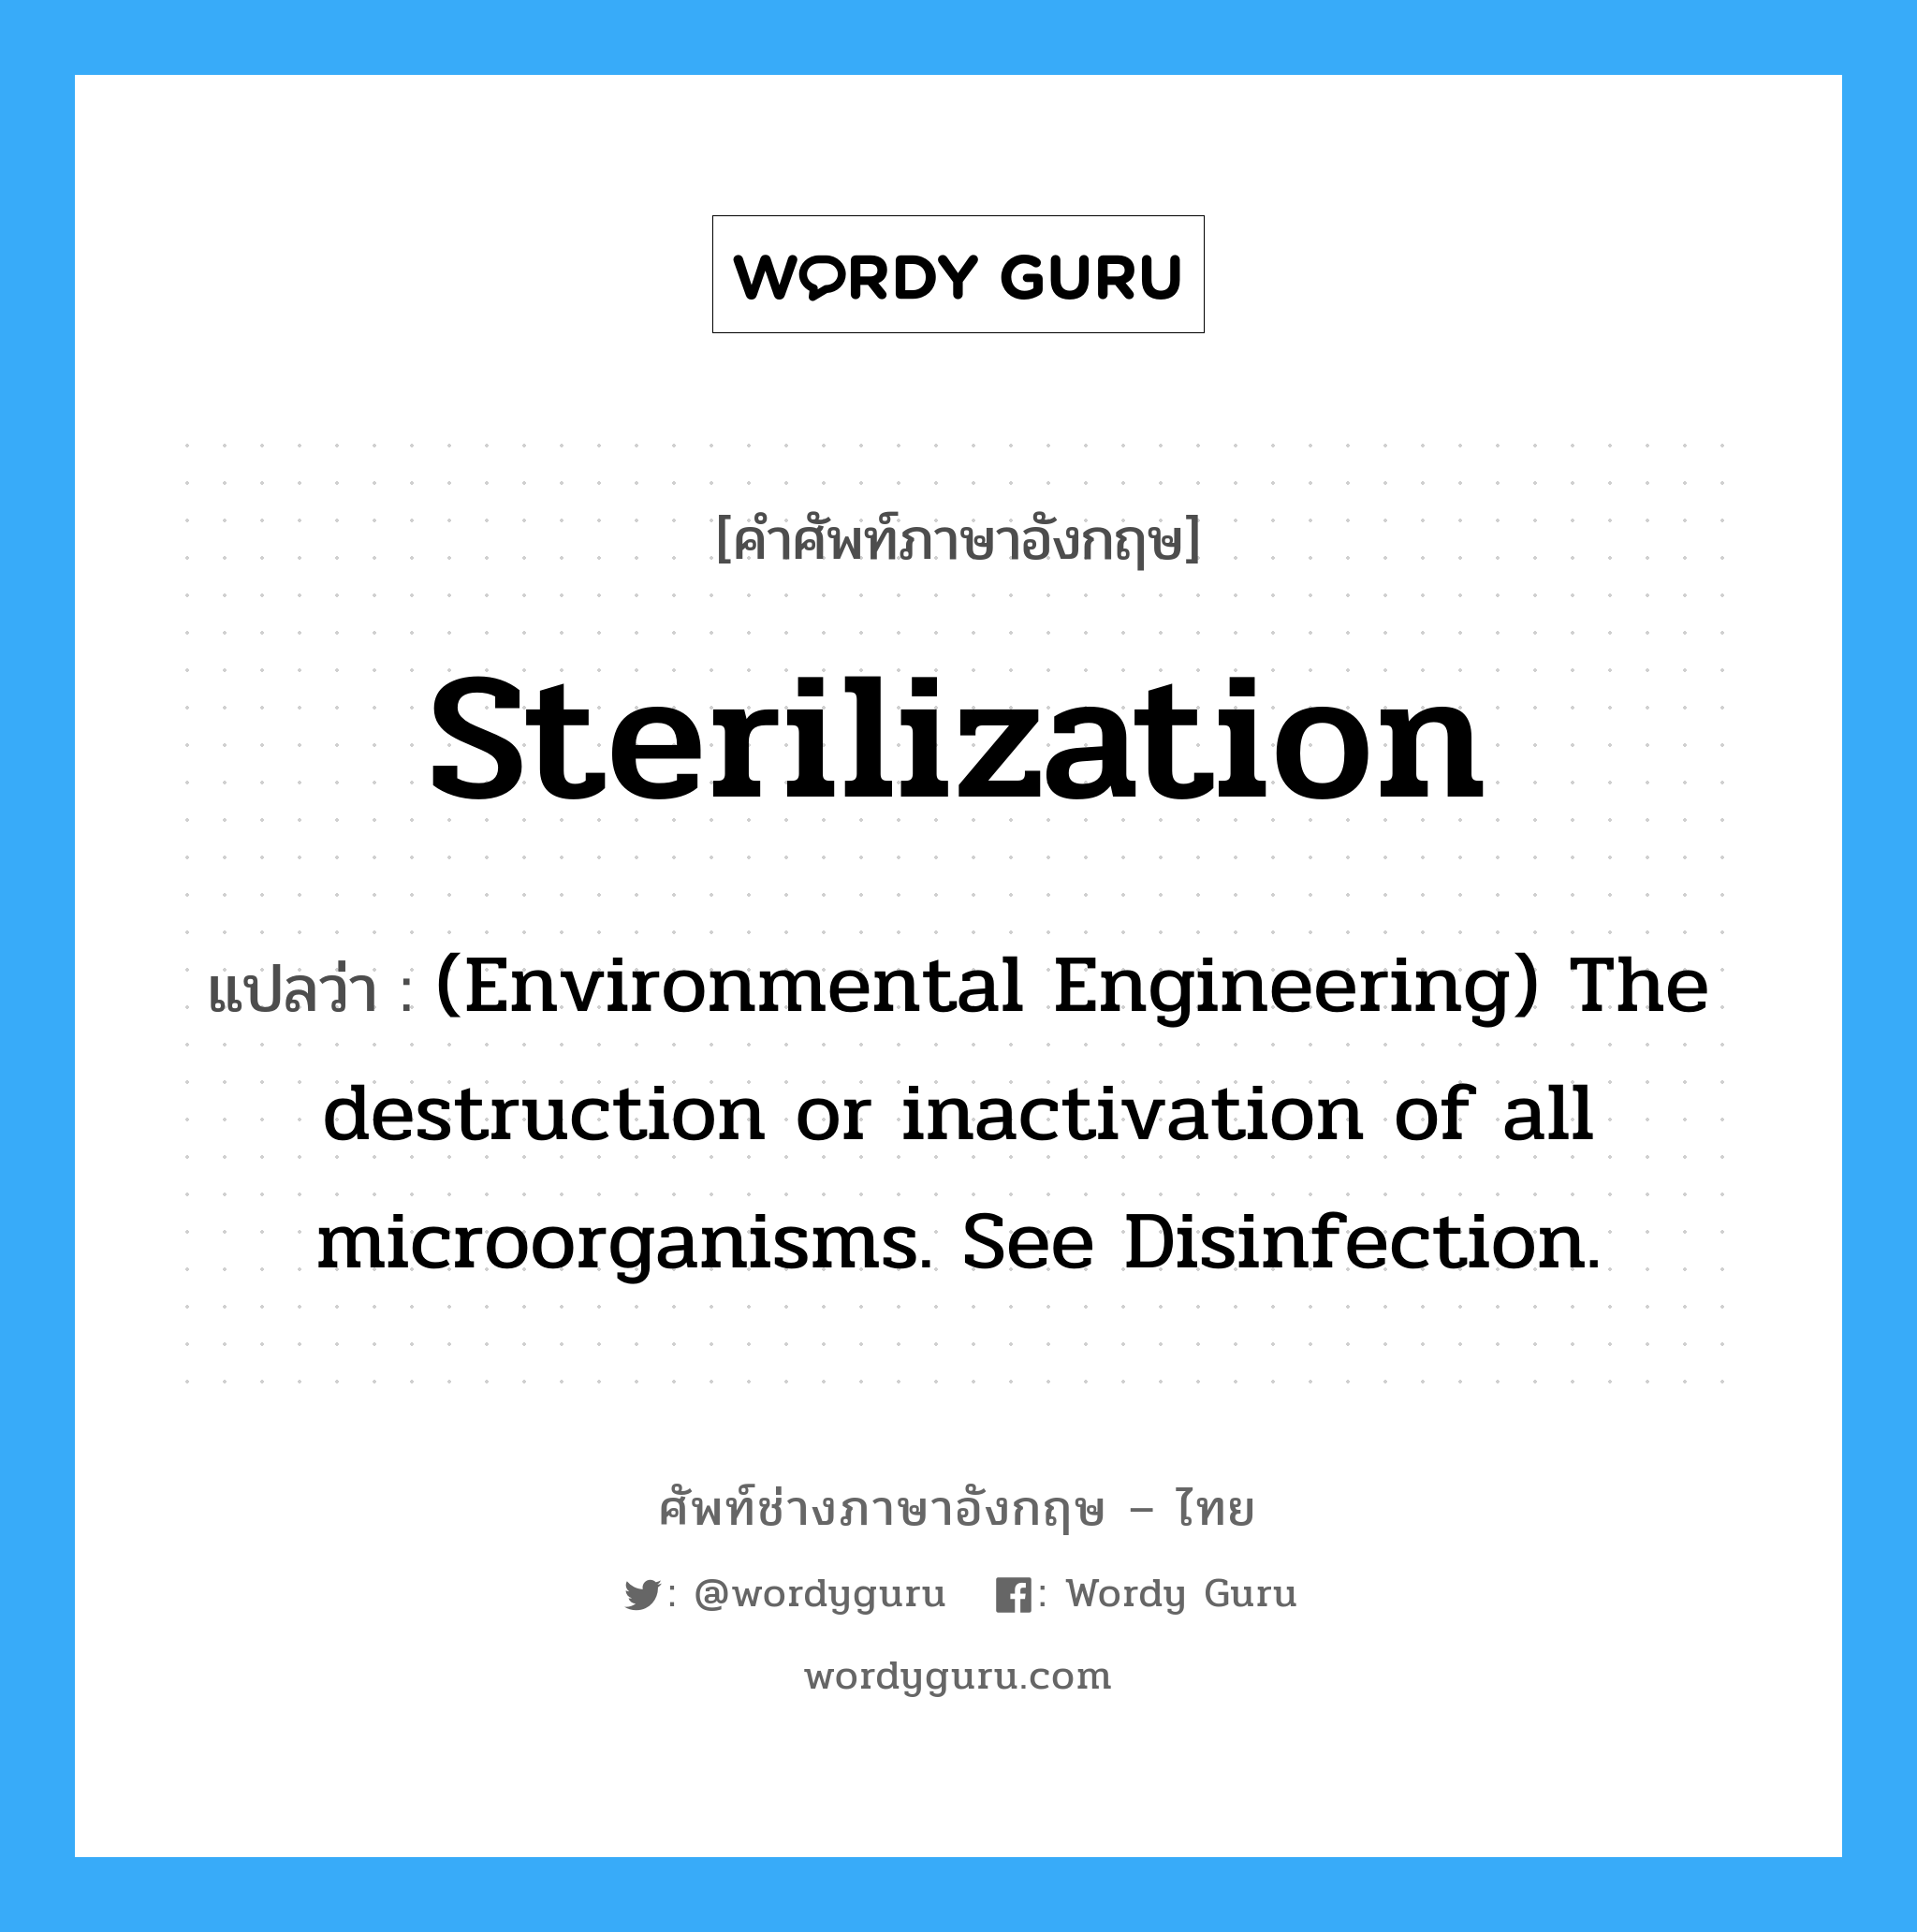 Sterilization แปลว่า?, คำศัพท์ช่างภาษาอังกฤษ - ไทย Sterilization คำศัพท์ภาษาอังกฤษ Sterilization แปลว่า (Environmental Engineering) The destruction or inactivation of all microorganisms. See Disinfection.